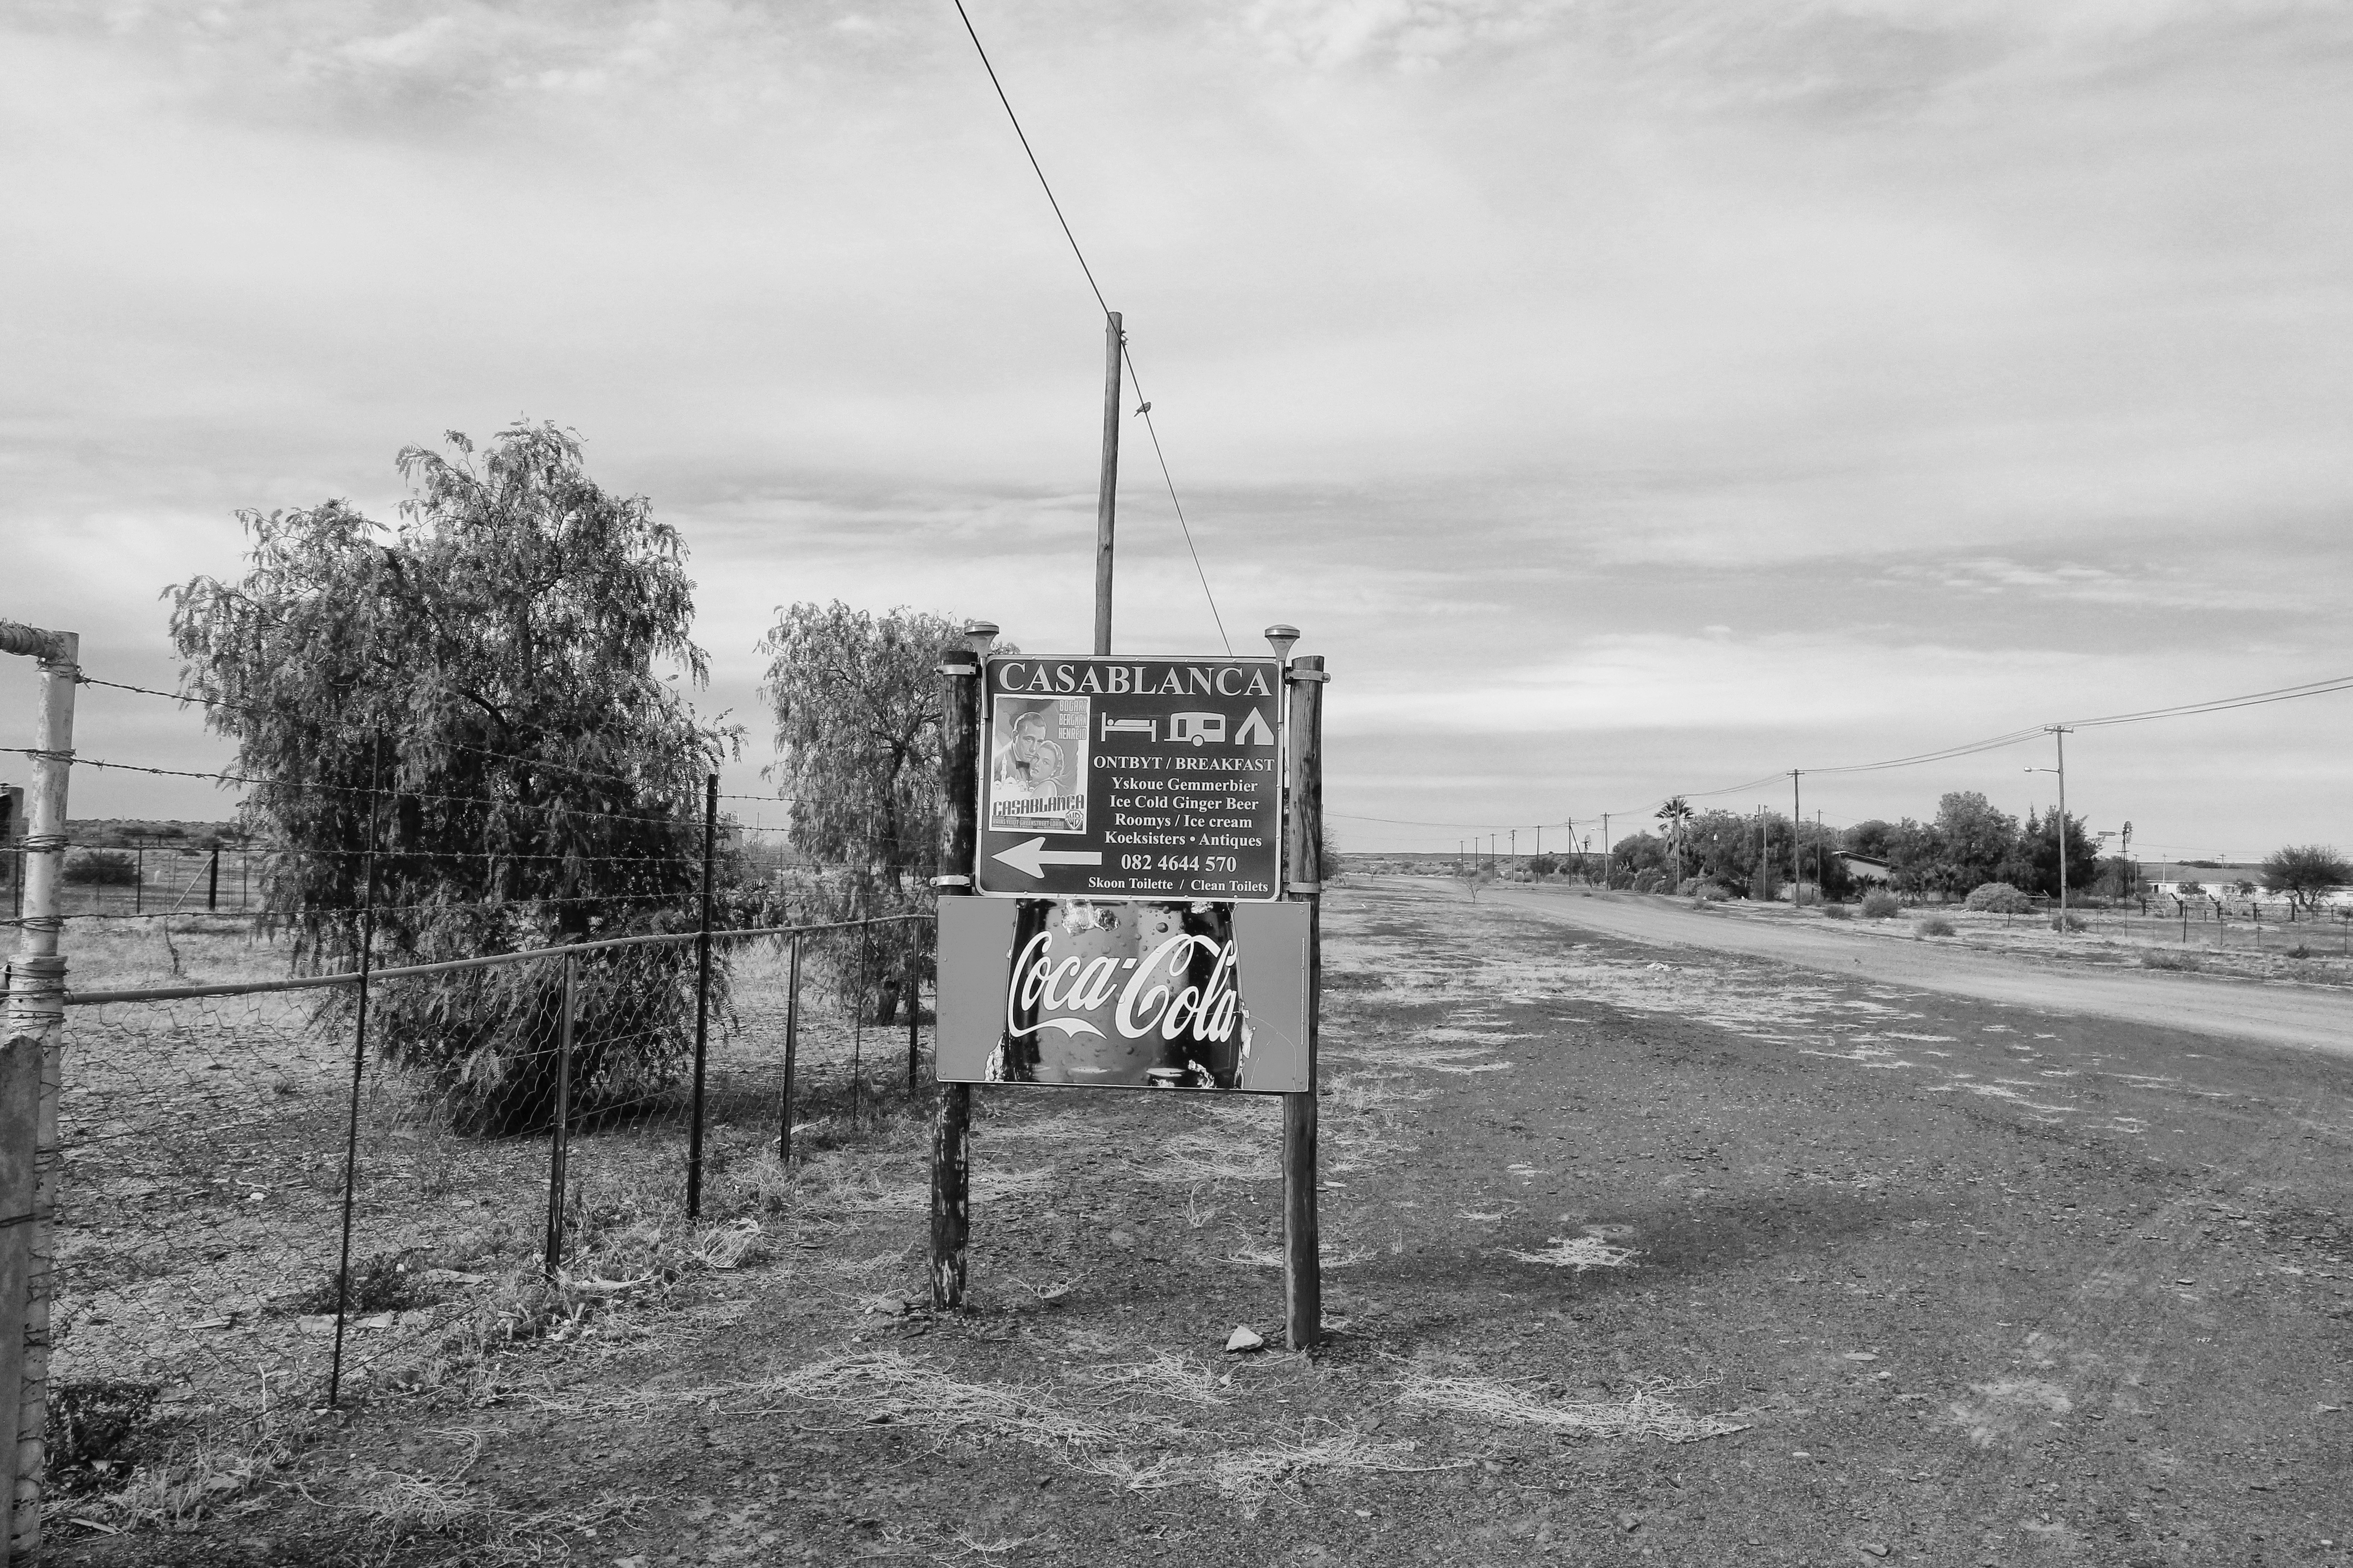 This way to The Casablanca, where Bogart, Presley and their friends have come to Brandvlei. Image: Chris Marais 